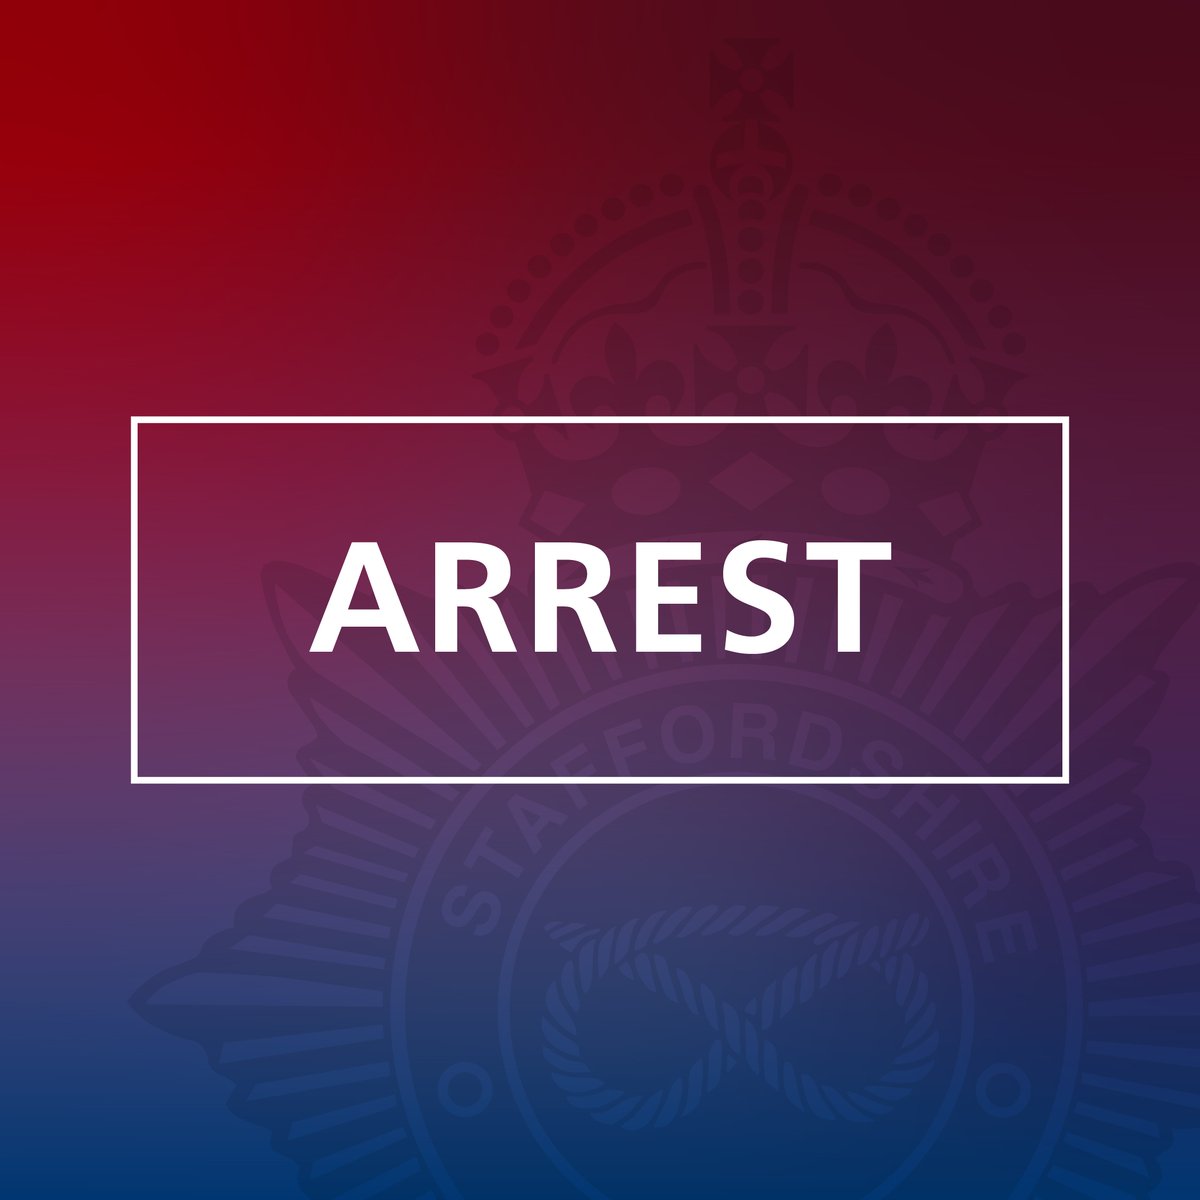 We have arrested three men after a pick-up truck was stolen from south Staffordshire. Read more here: orlo.uk/SnBqM